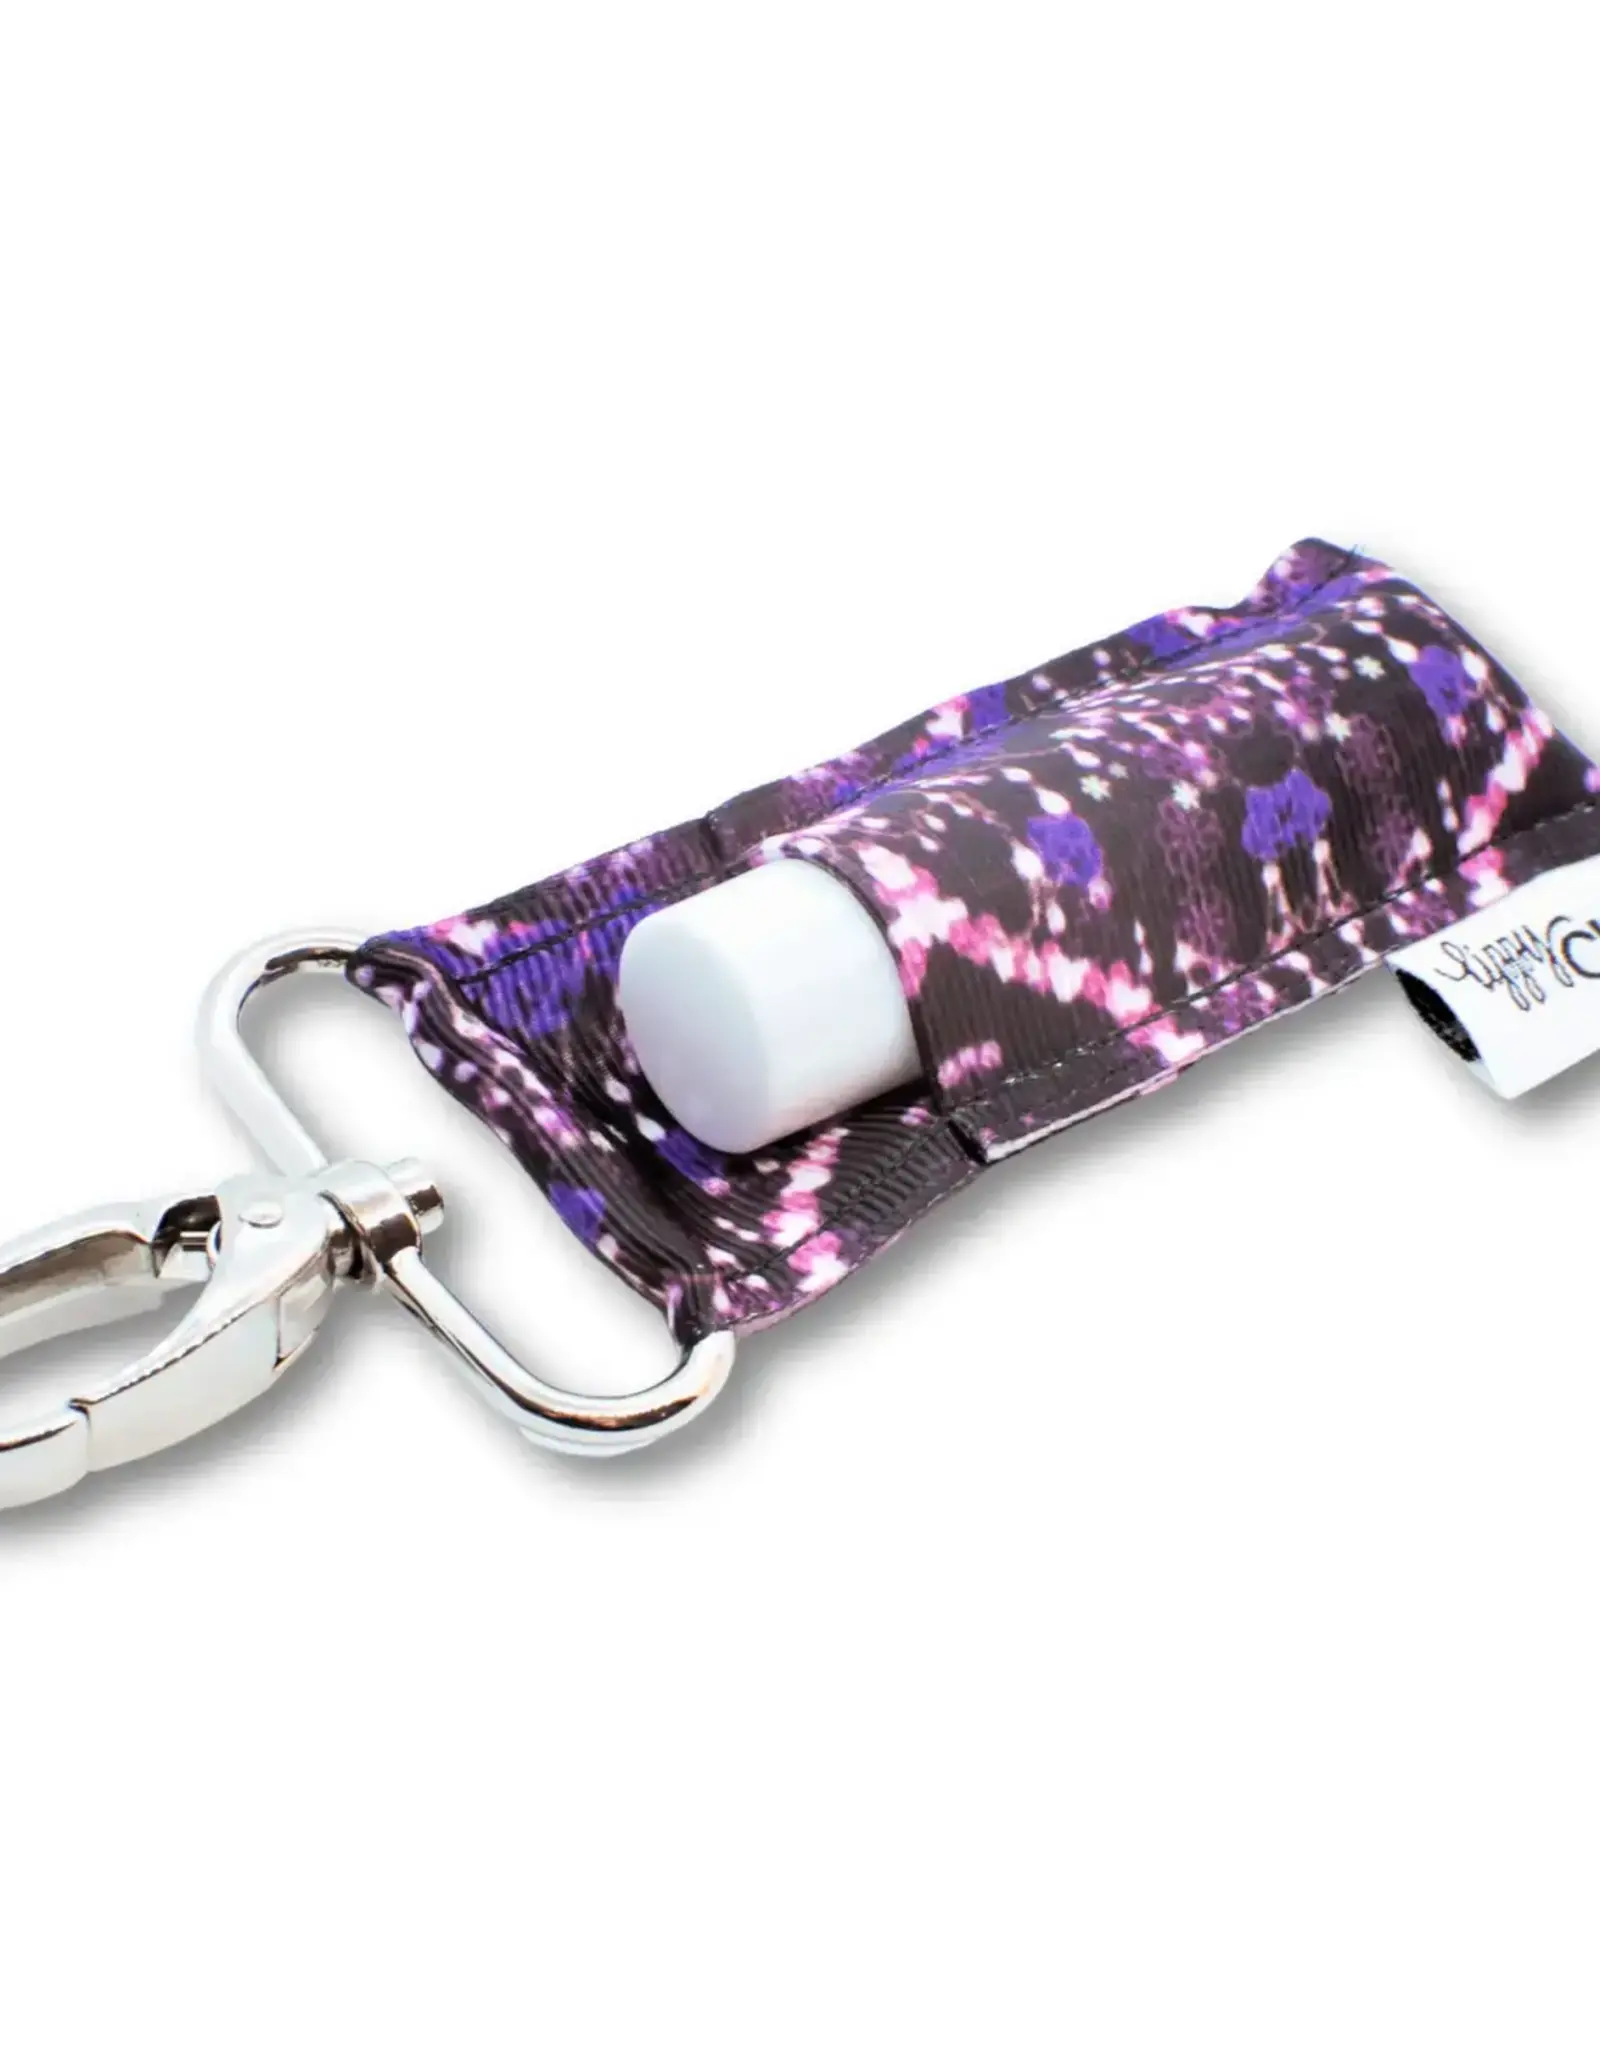 Lippyclip Baubles and Bling Lip Balm Holder